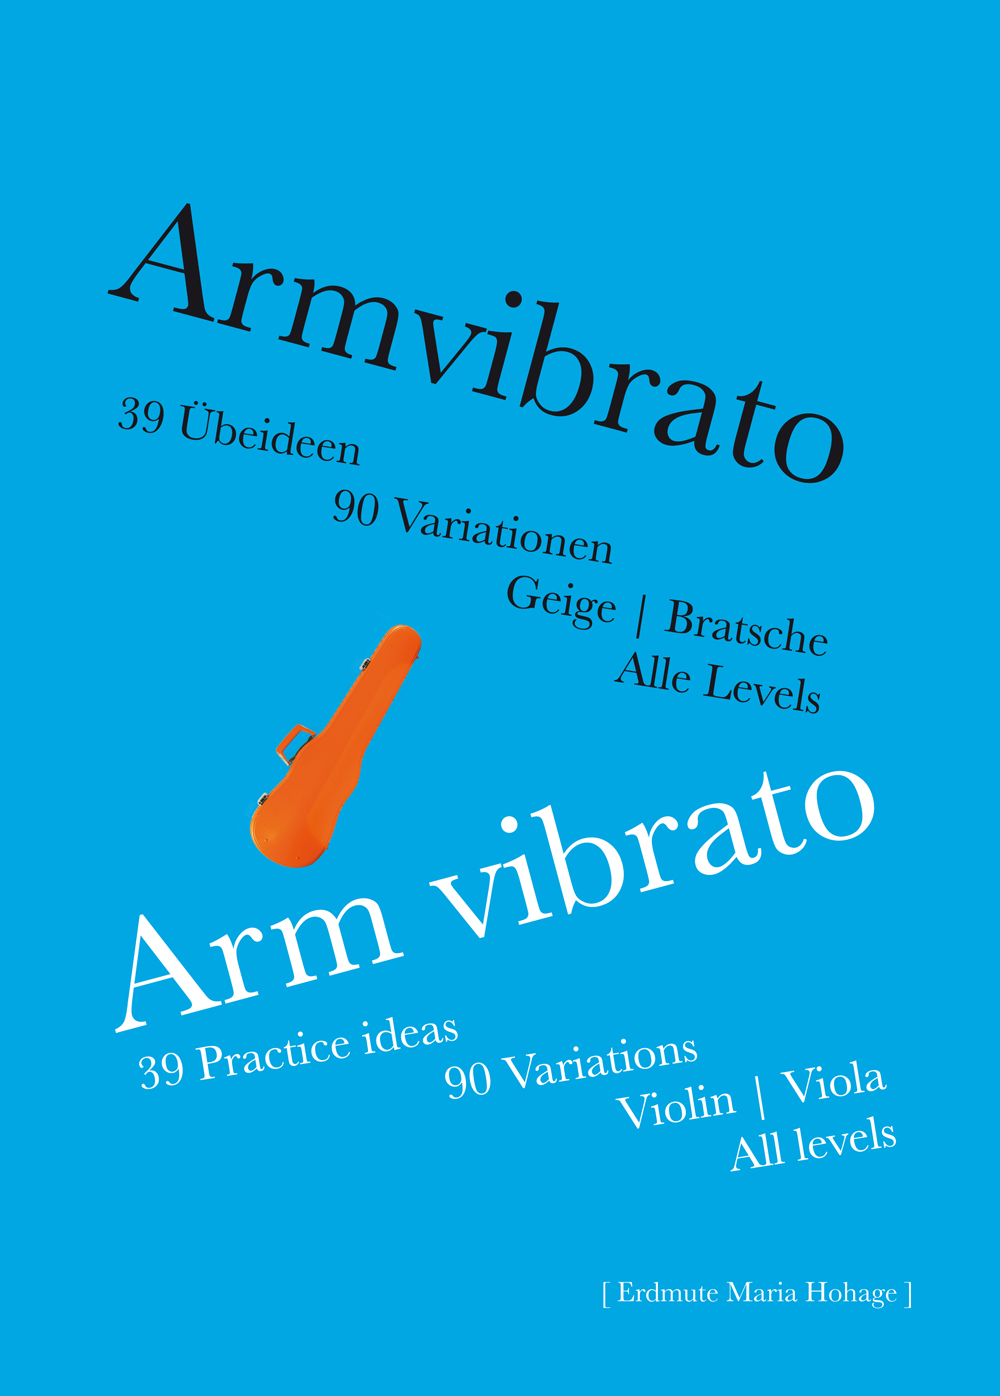 Cover for the booklet arm vibrato for violin and viola